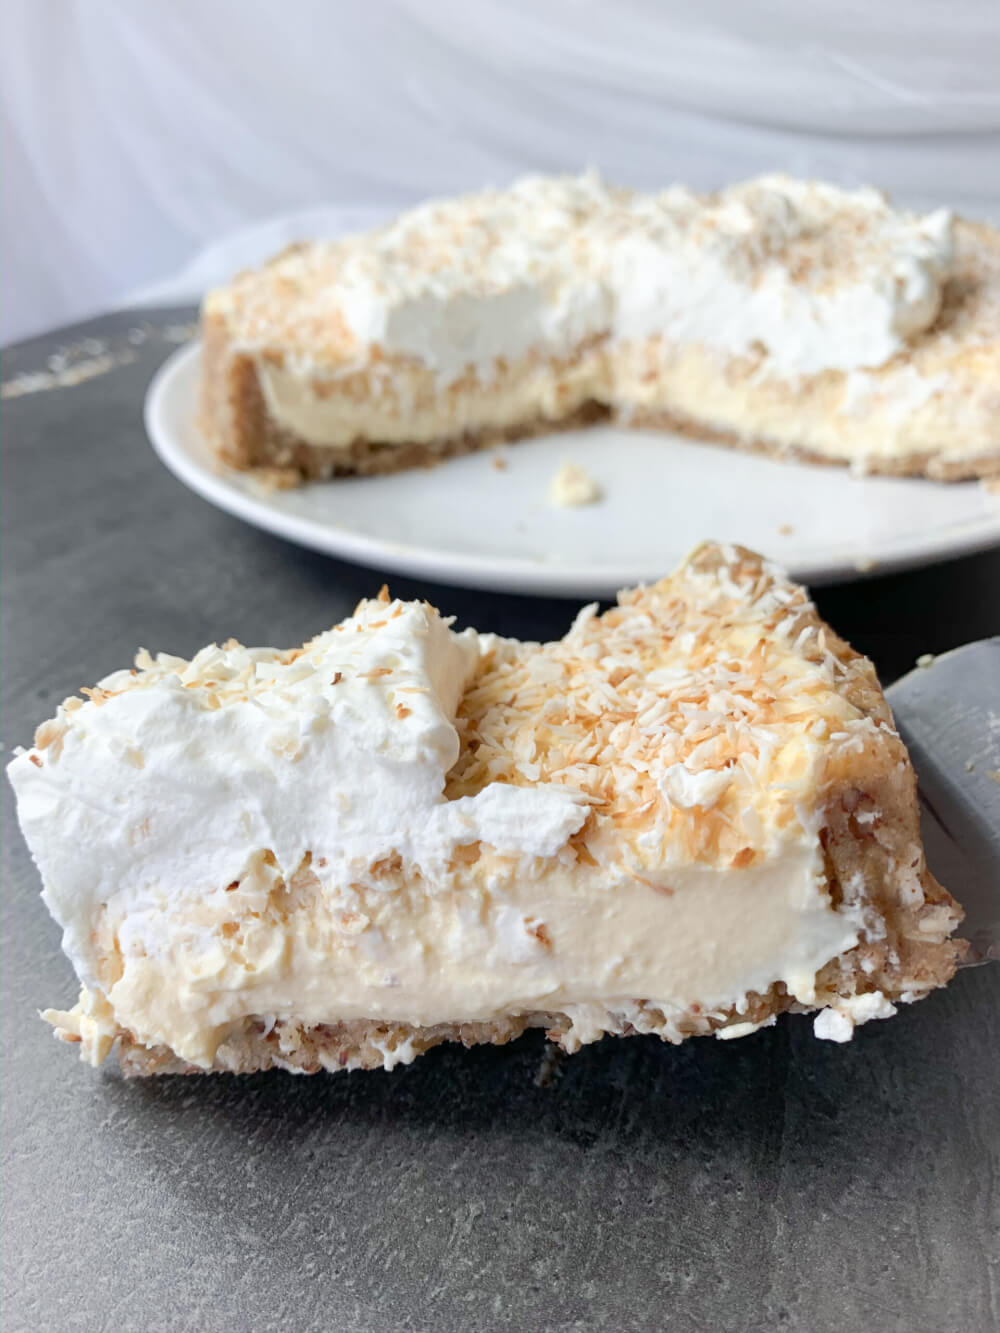 61 Delicious Coconut Dessert Recipes Perfect for Summer featured by top Hawaii blog, Hawaii Travel with Kids: Slice of low carb coconut cream pie with heavy whipping cream on top